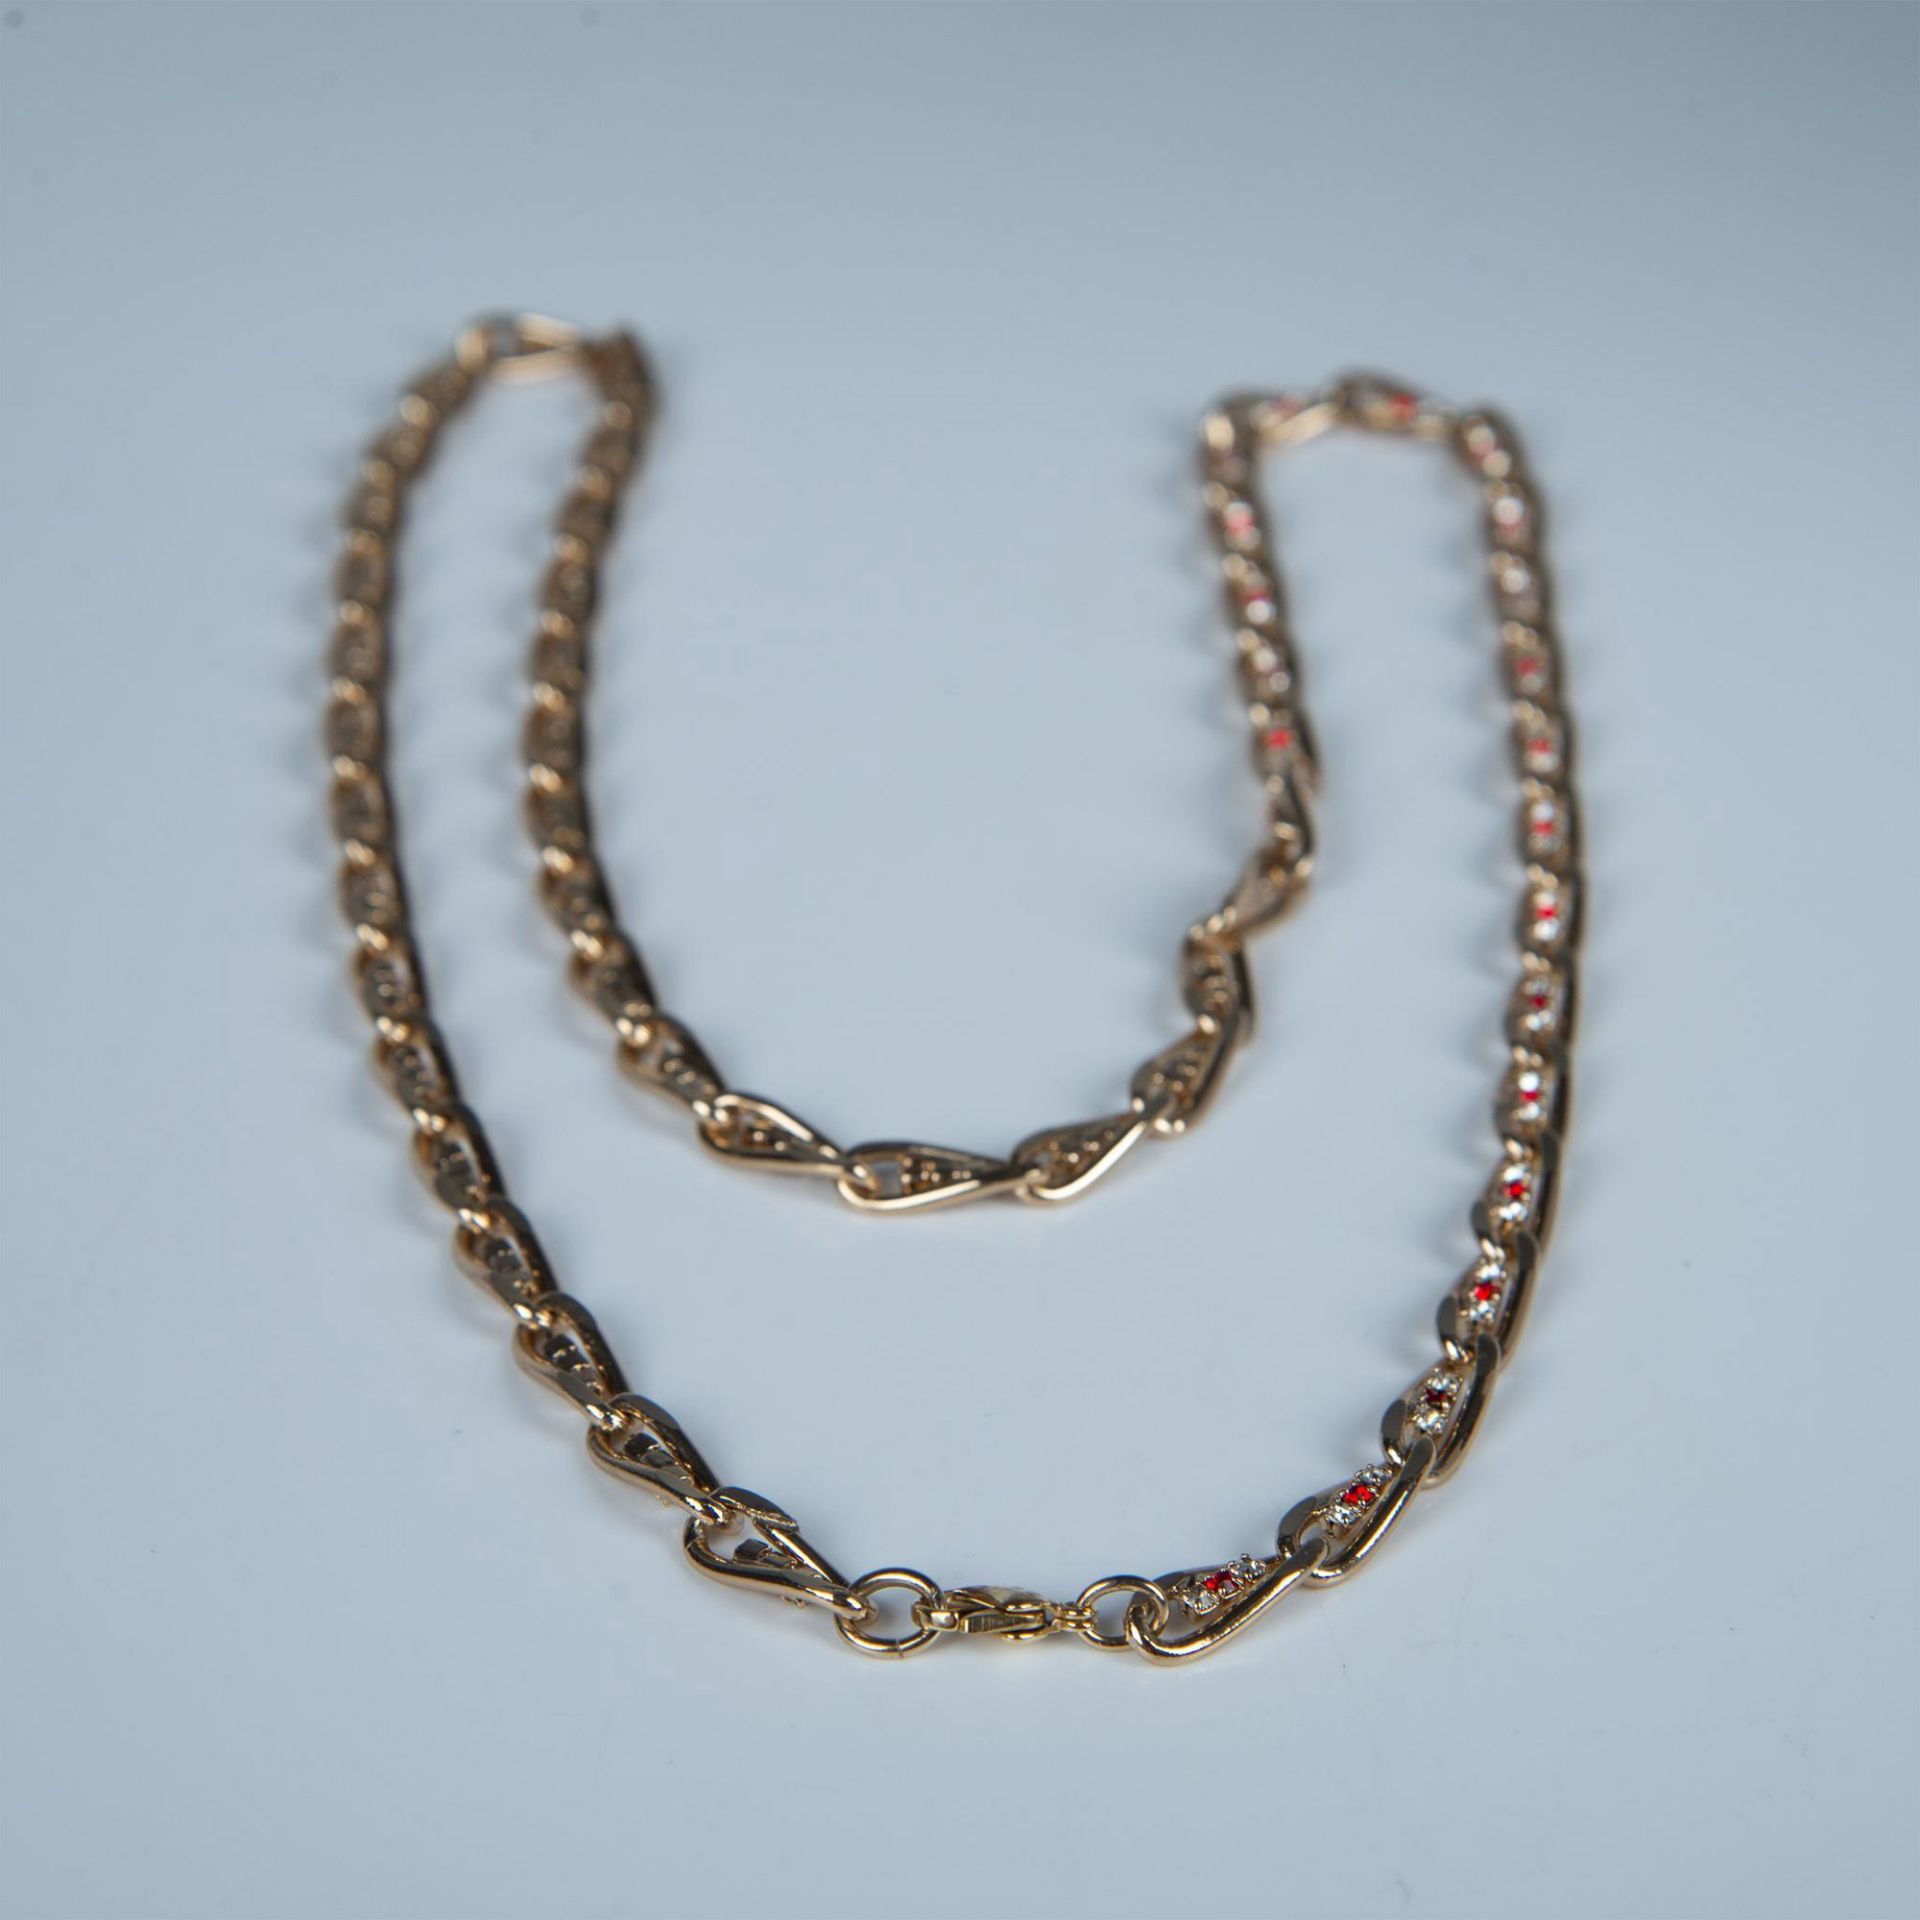 Unique Gold Metal & Crystal Chain Necklace - Image 3 of 3